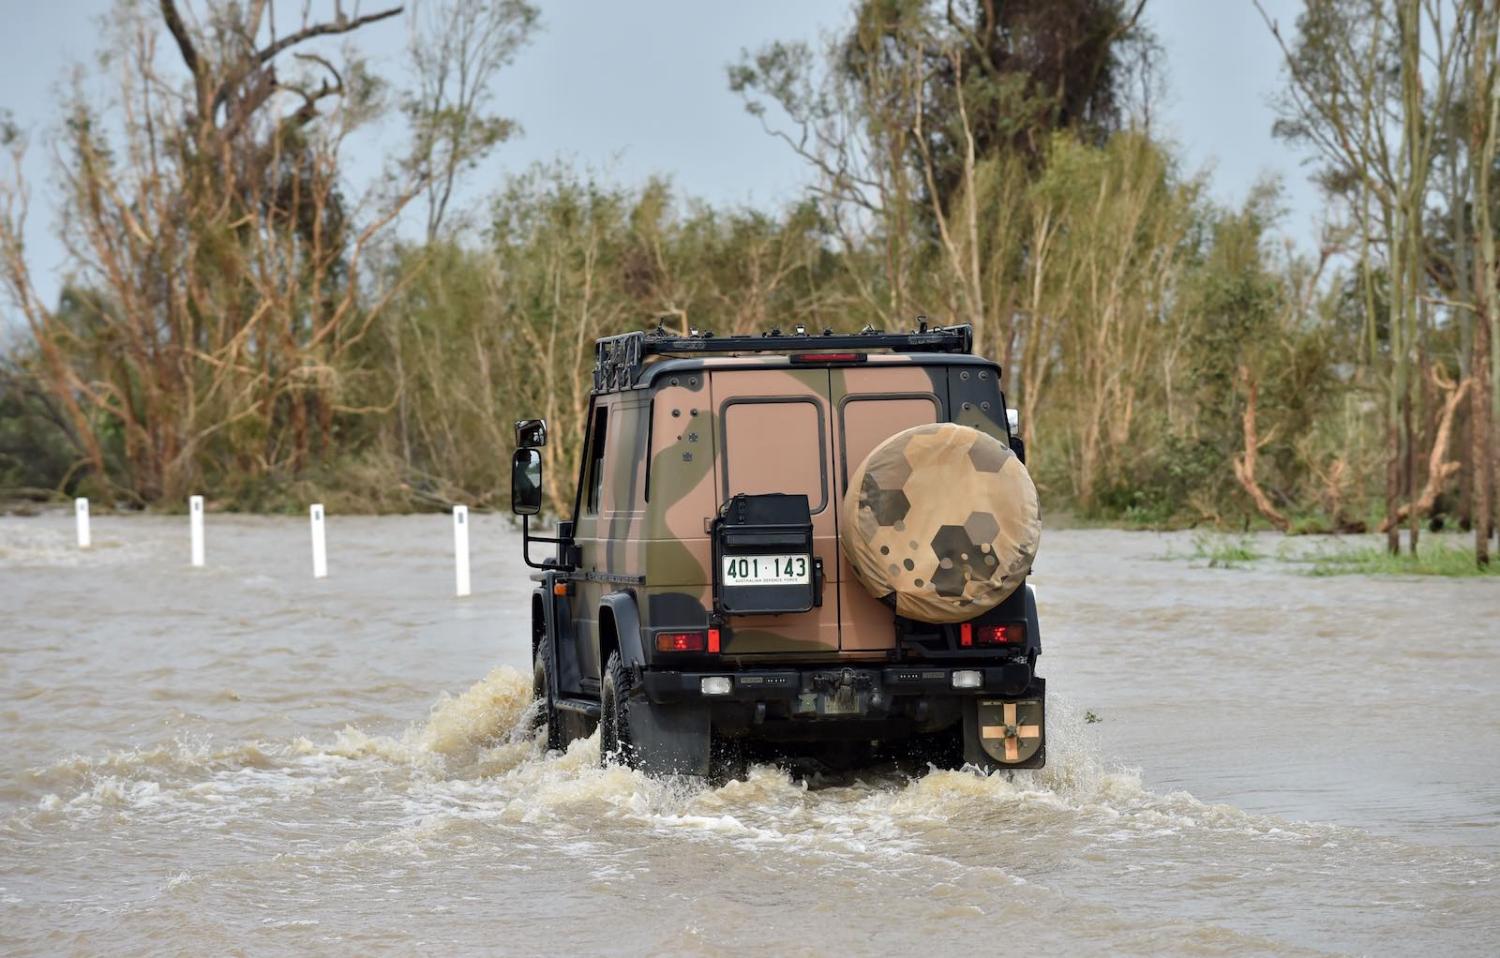 An Australian army vehicle in floodwaters near the Queensland town of Bowen in March 2017 following Cyclone Debbie (Photo: Peter Parks via Getty)